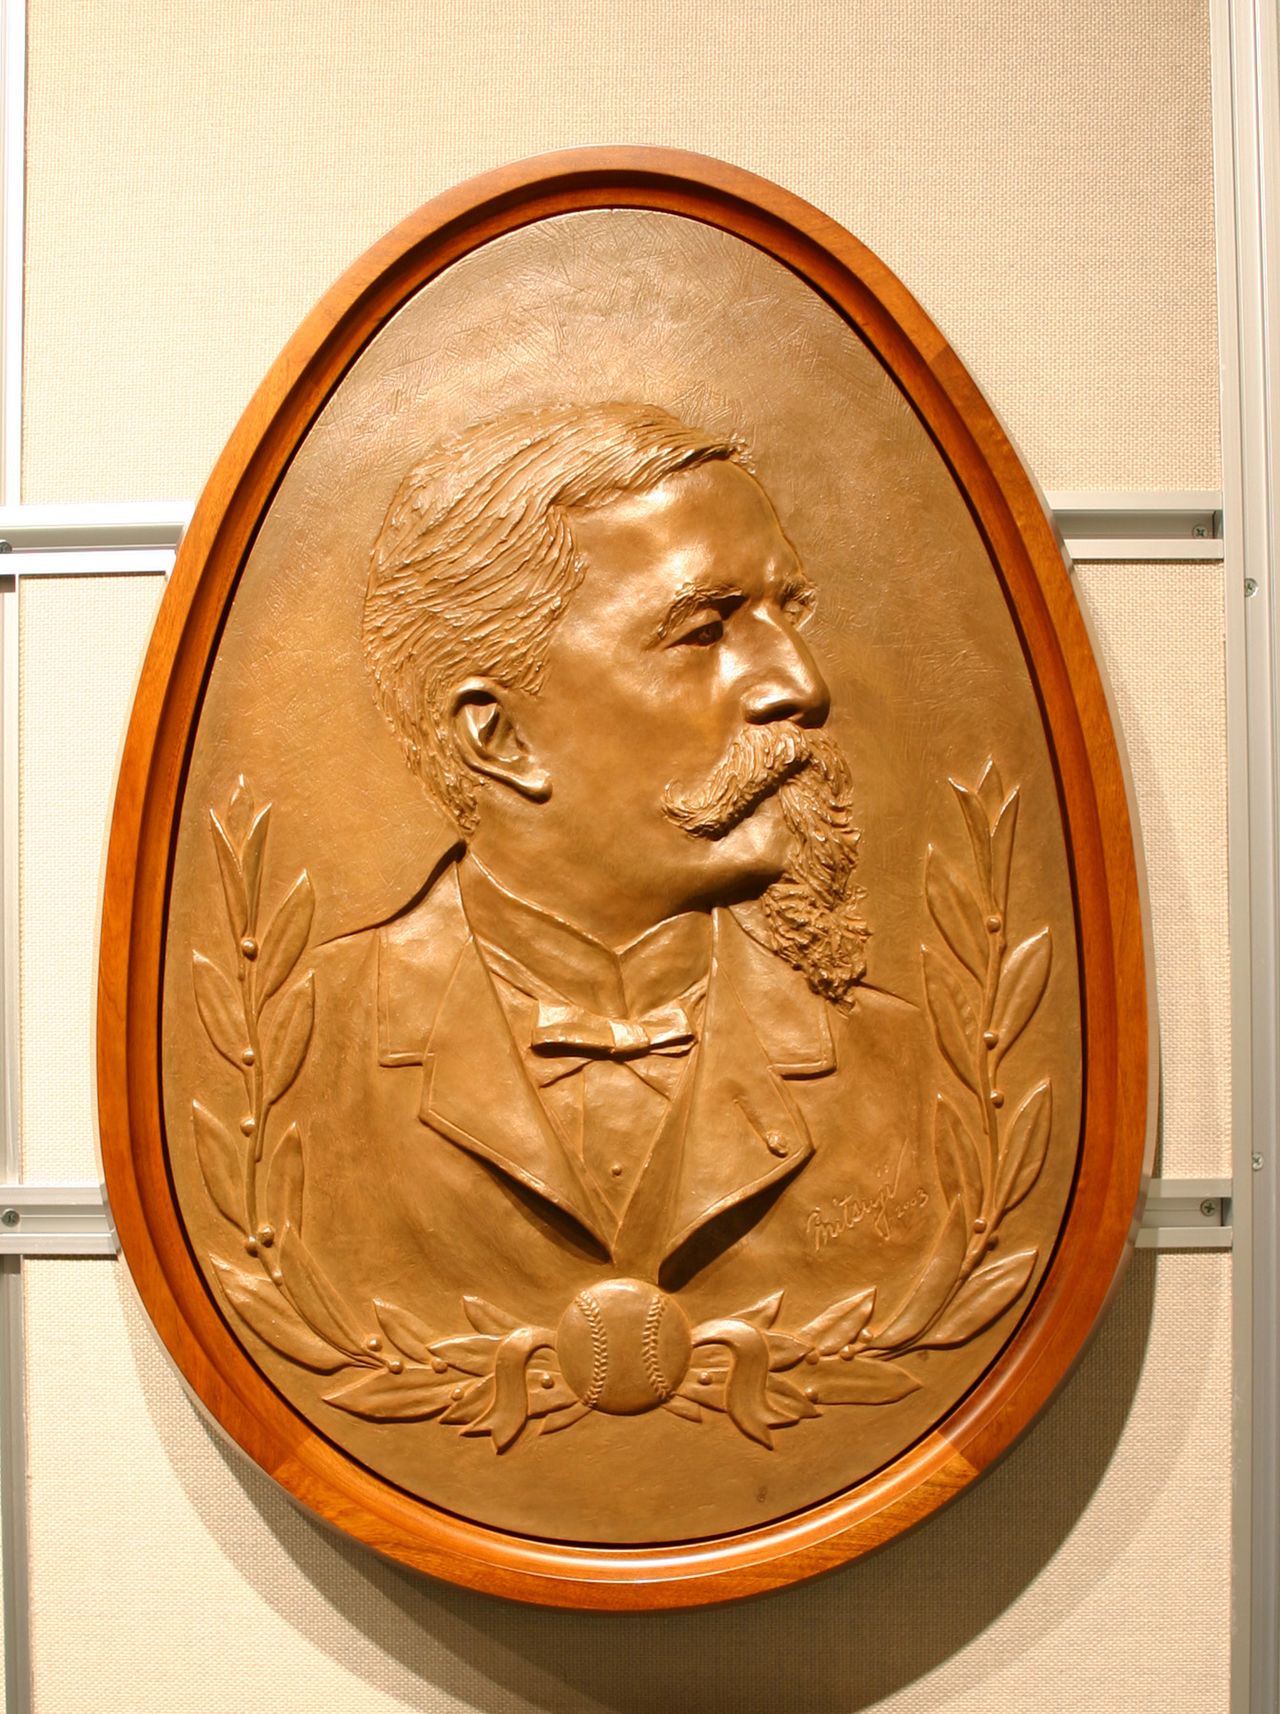 A plaque commemorating American teacher Horace Wilson hangs at the Baseball Hall of Fame and Museum in Bunkyō, Tokyo. (Courtesy of the Baseball Hall of Fame and Museum)